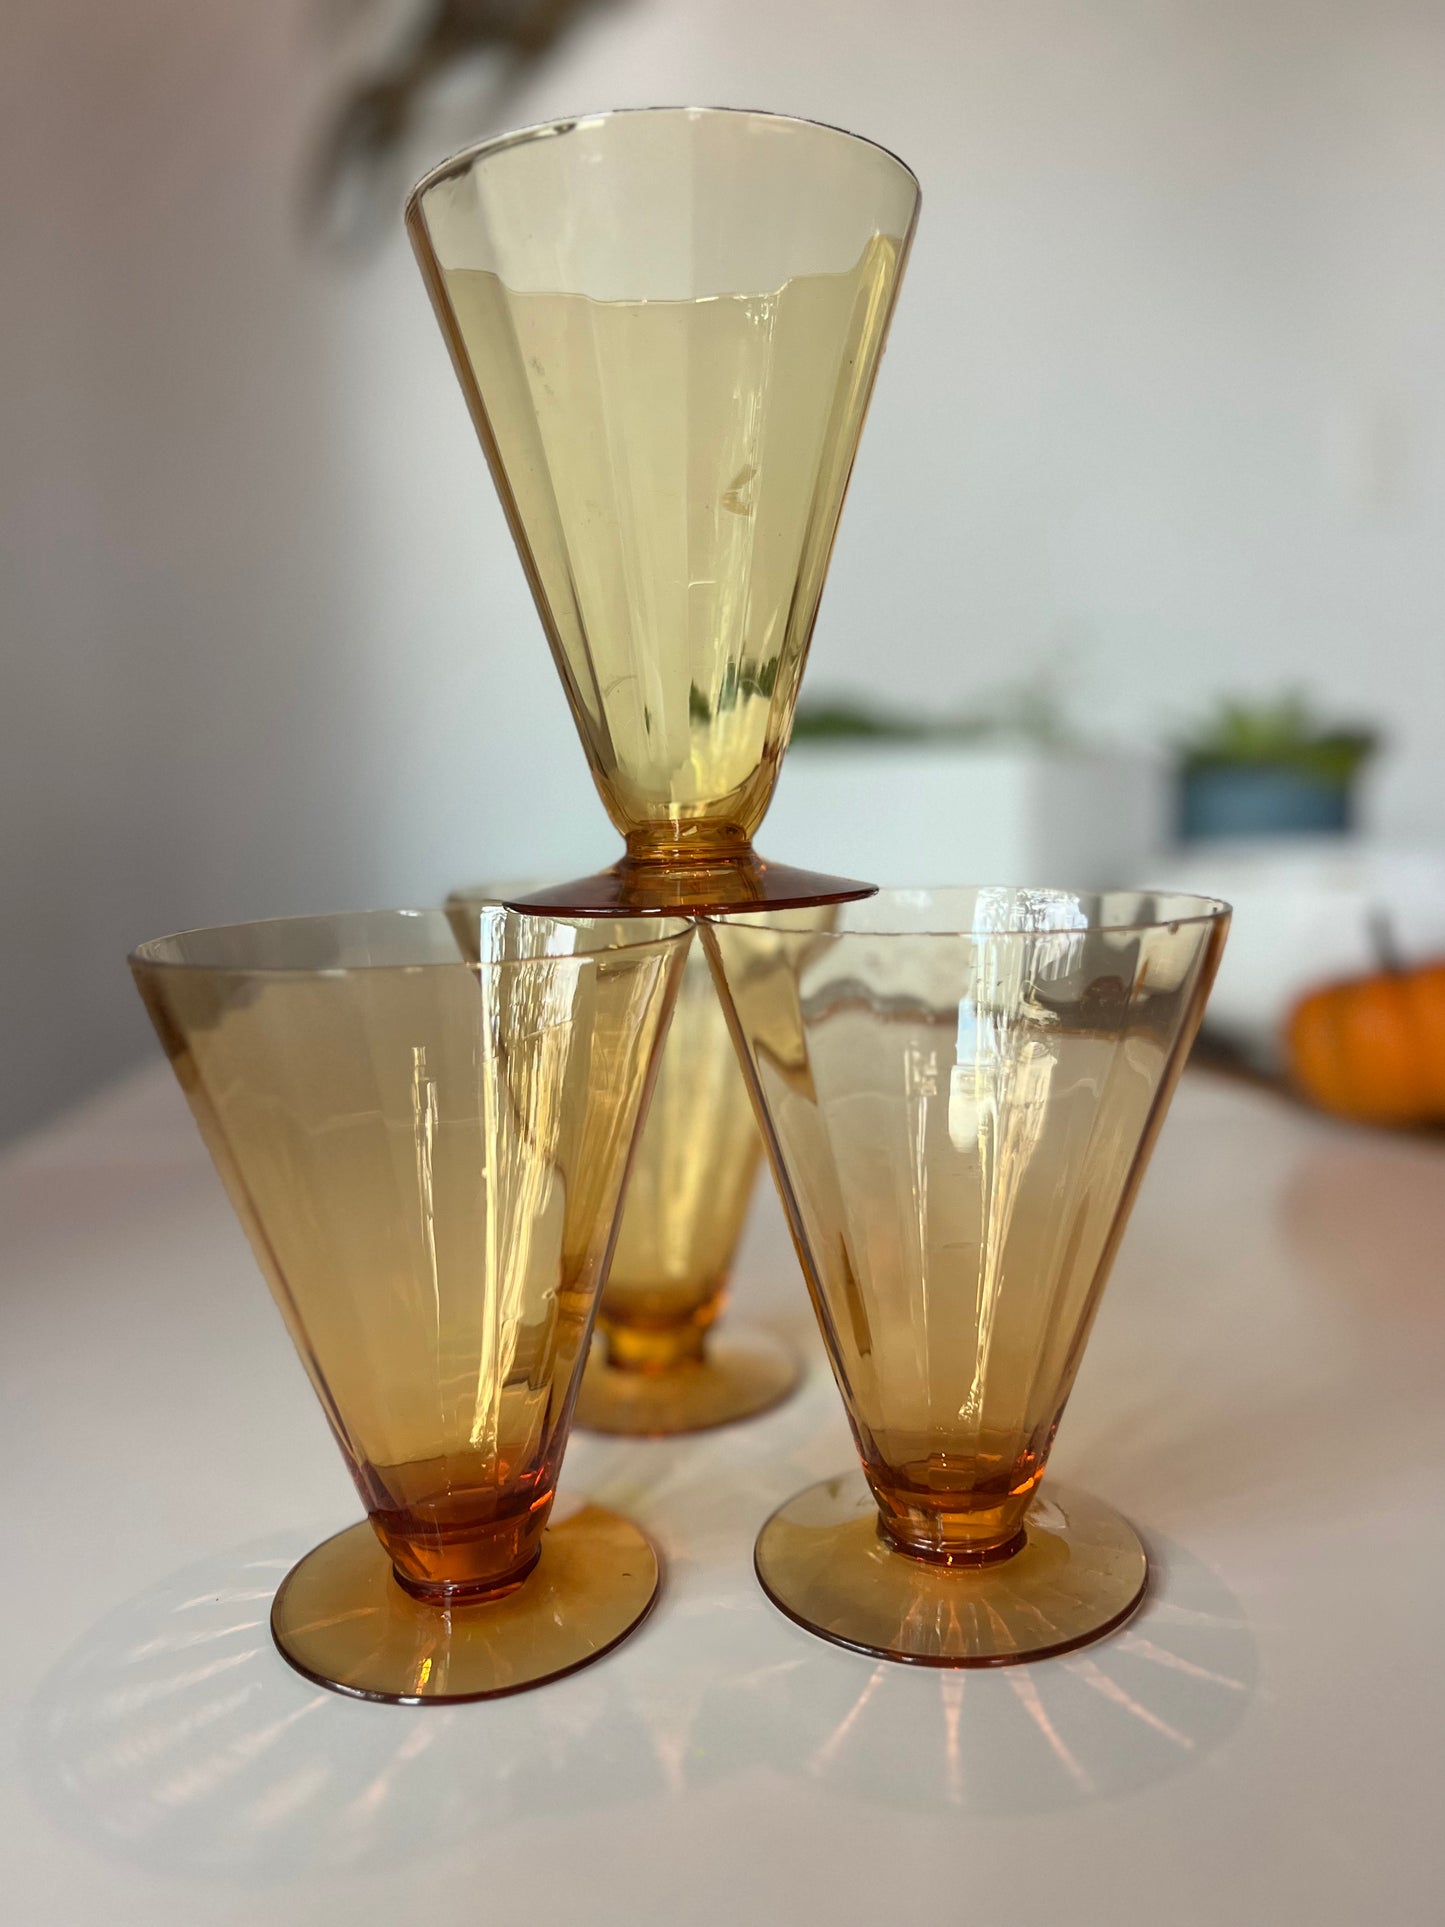 Ambered Antique Footed Glasses